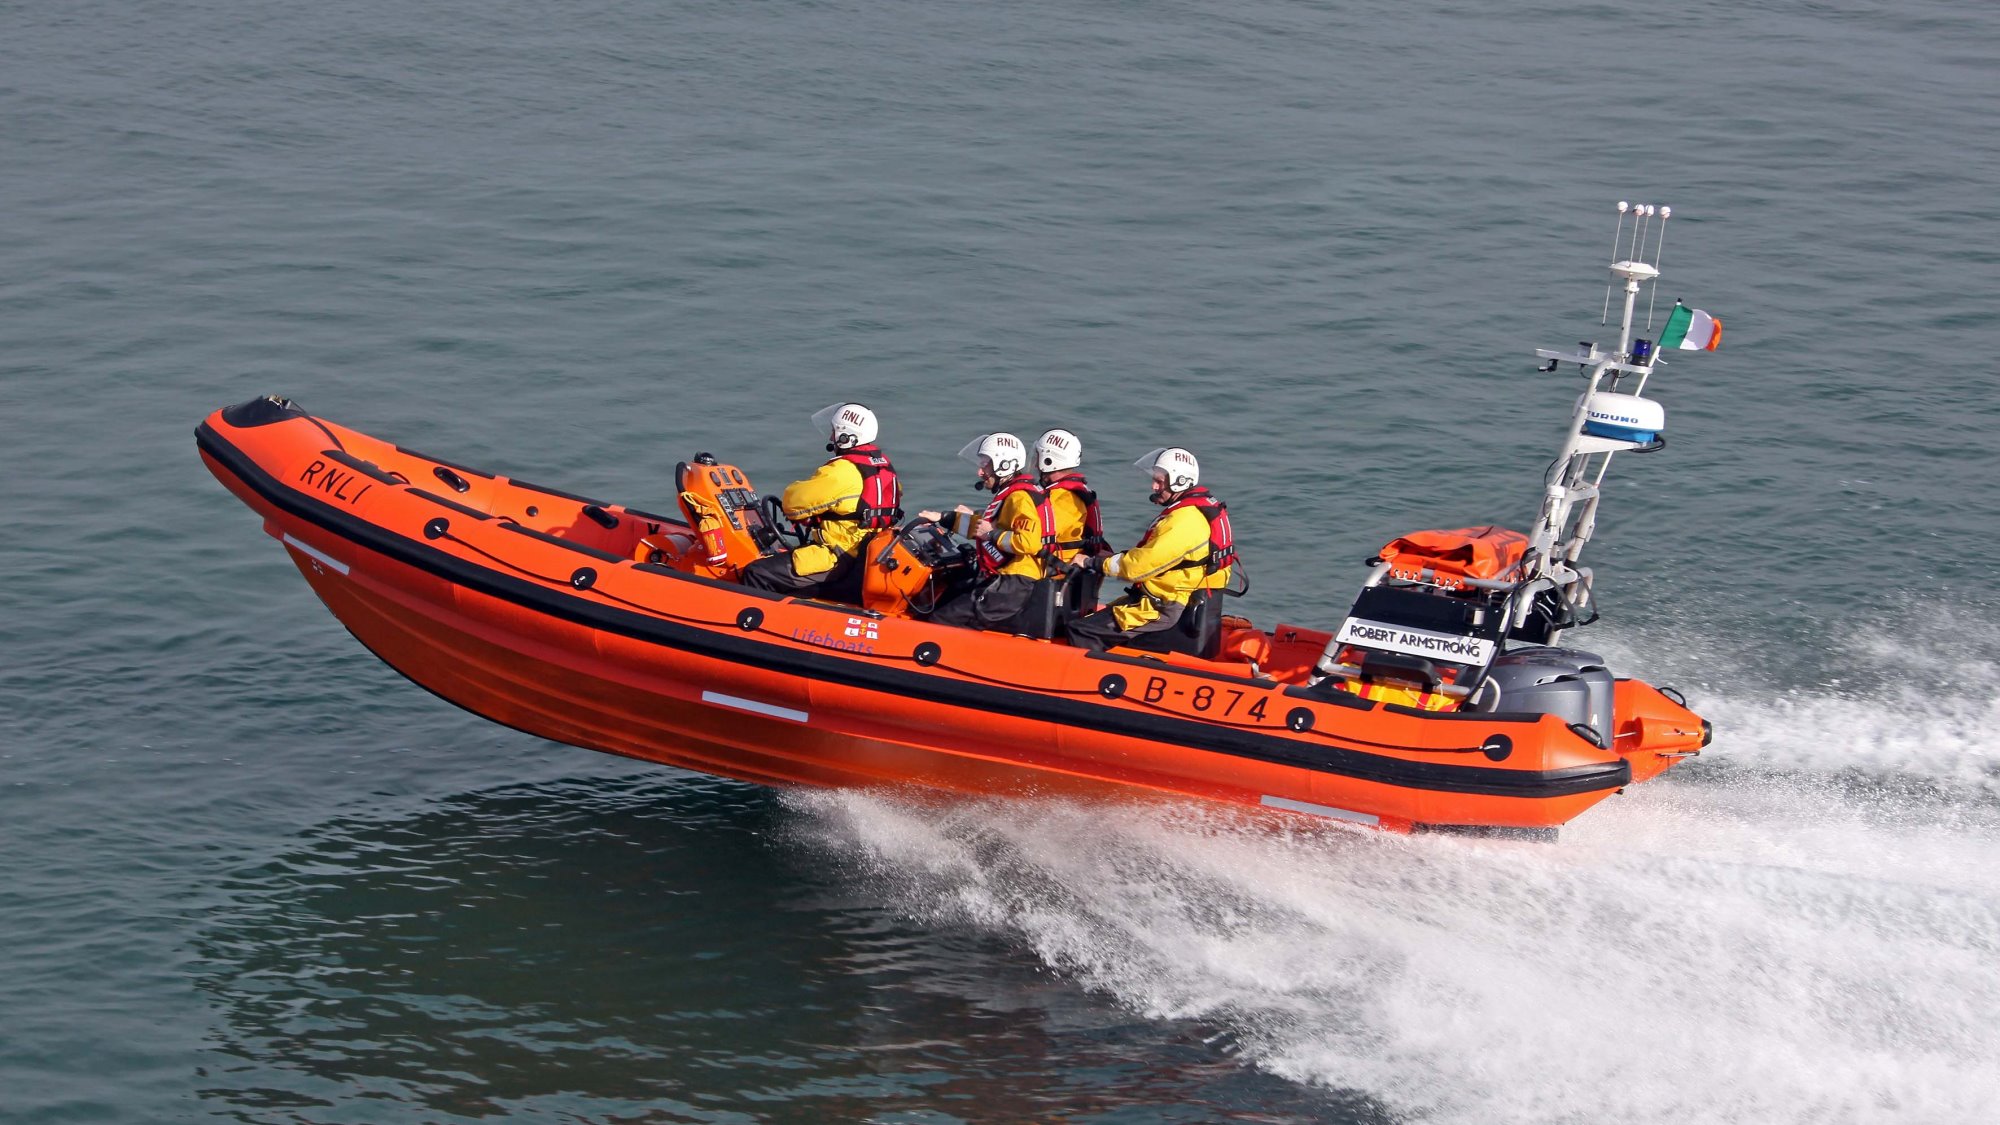 B Class Atlantic Lifeboat - One Of The Fastest RNLI Lifeboats